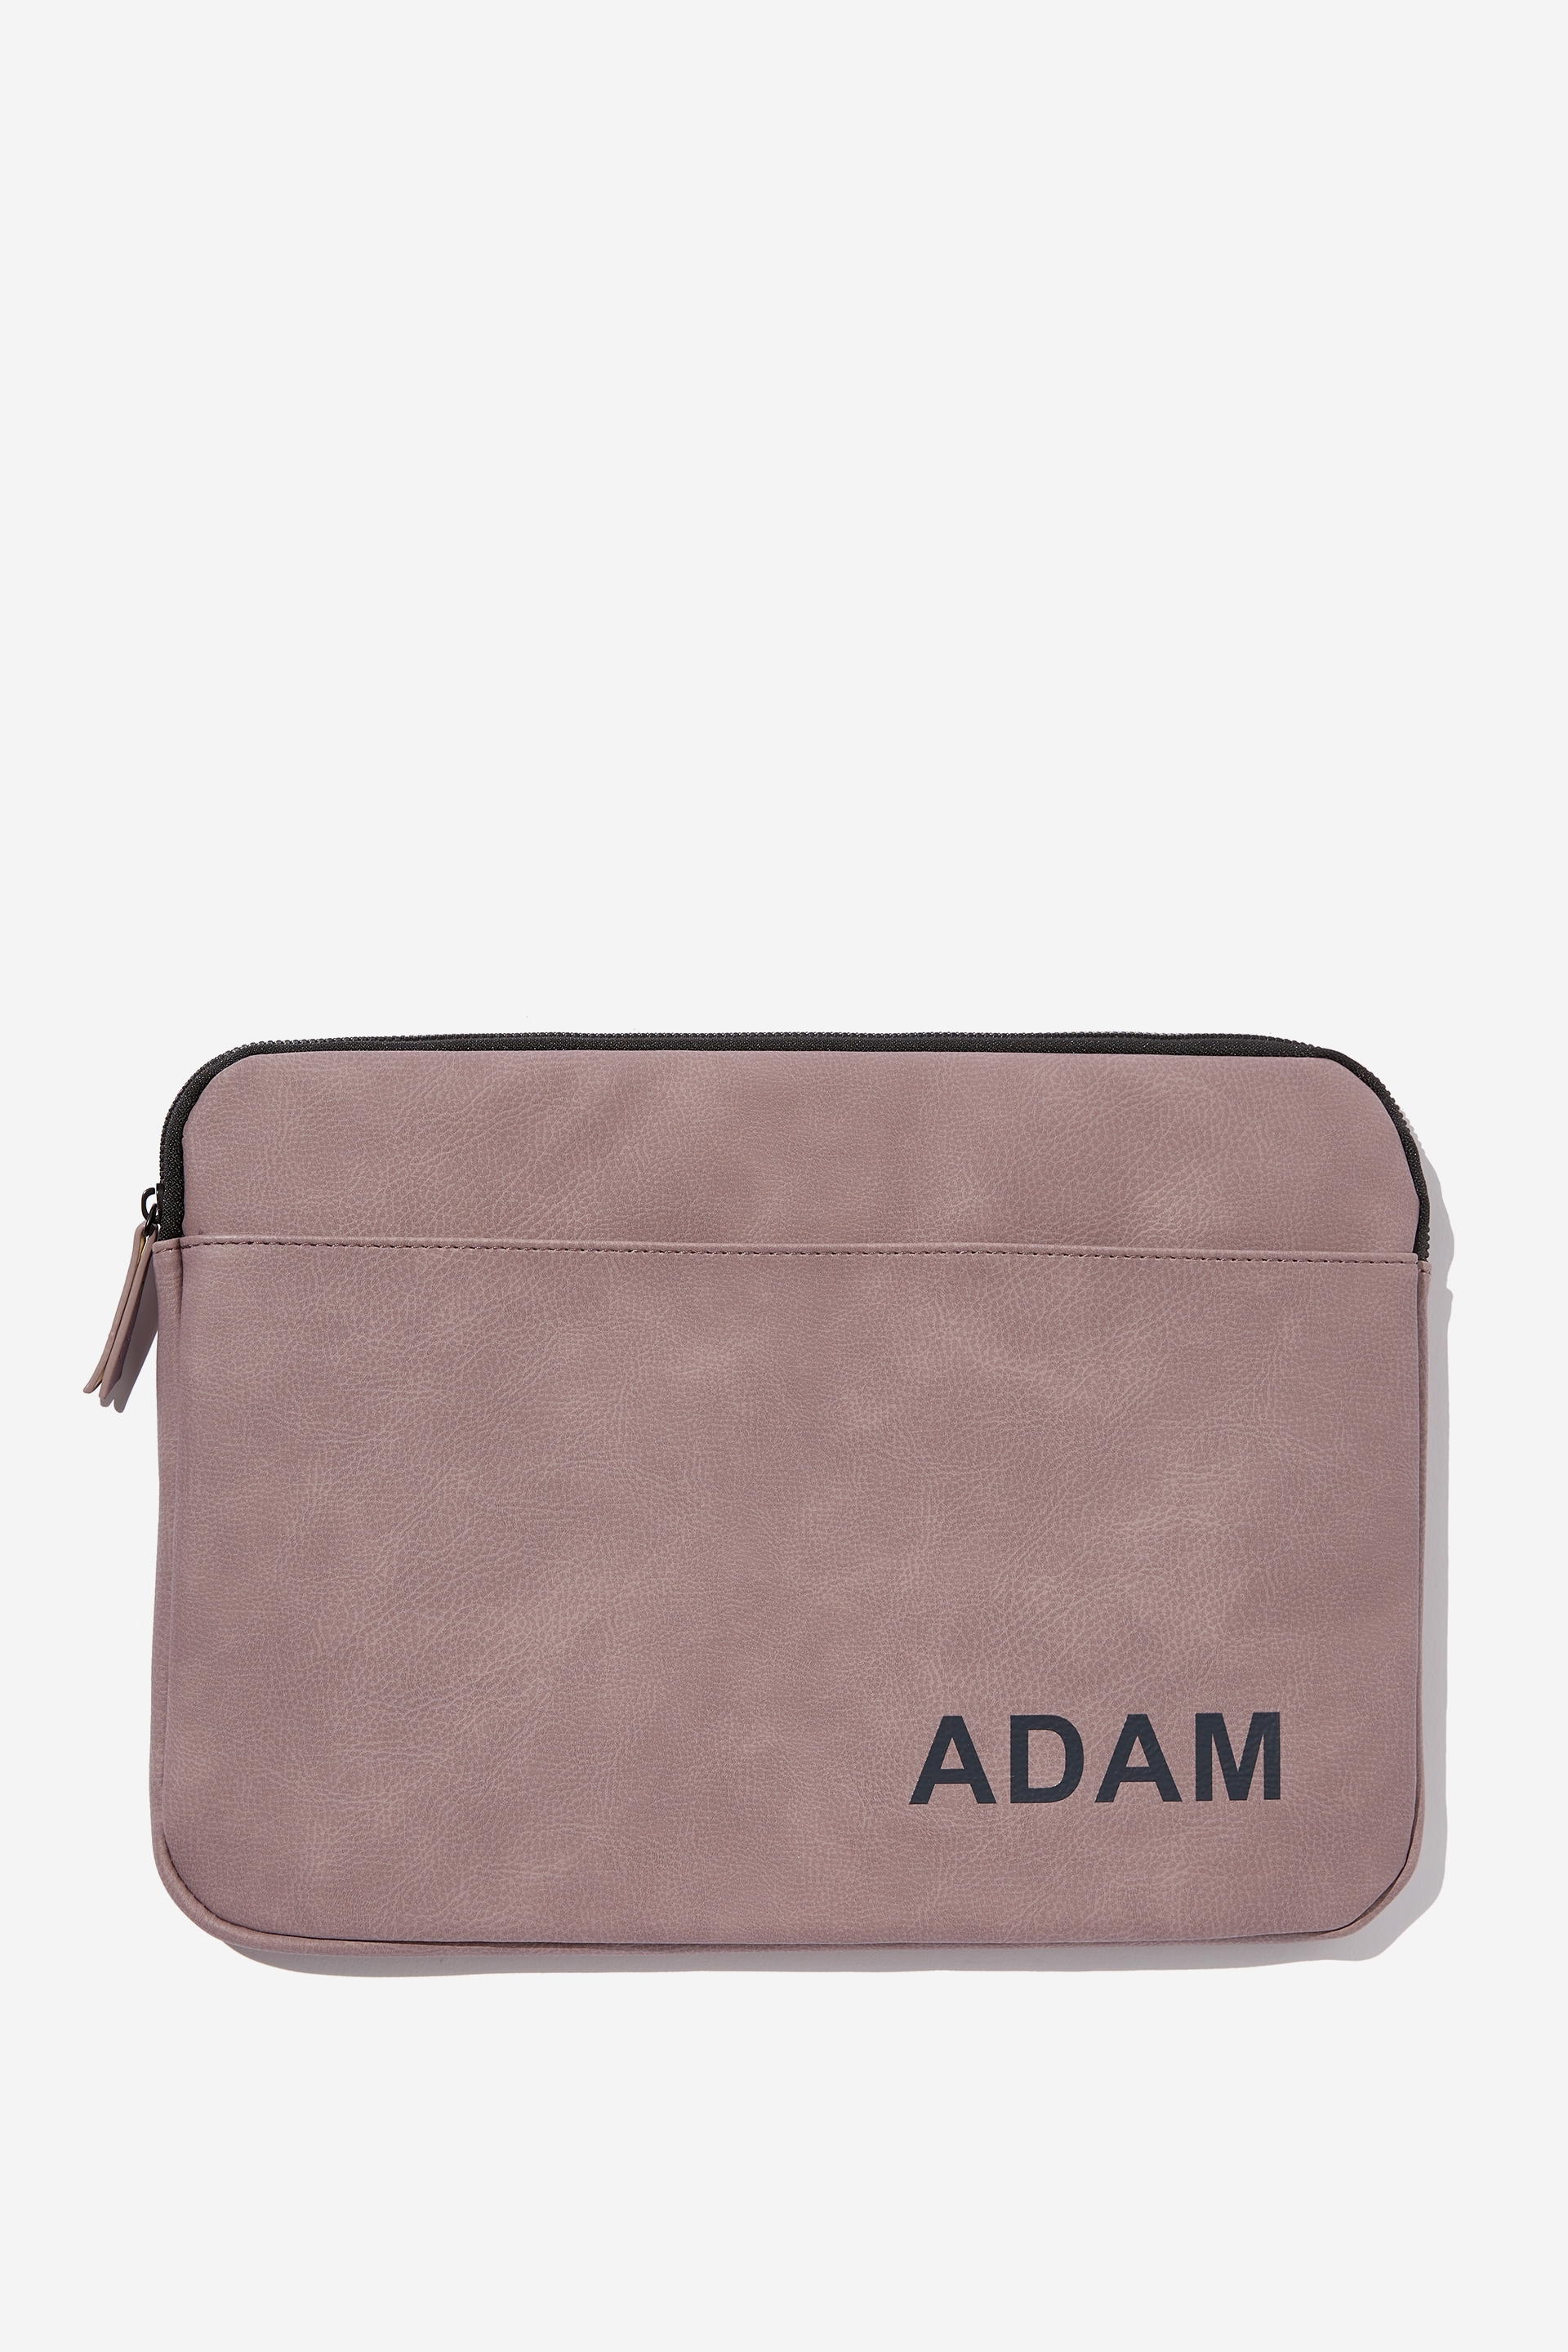 Typo - Personalised Core Laptop Cover 13 Inch - Lavender